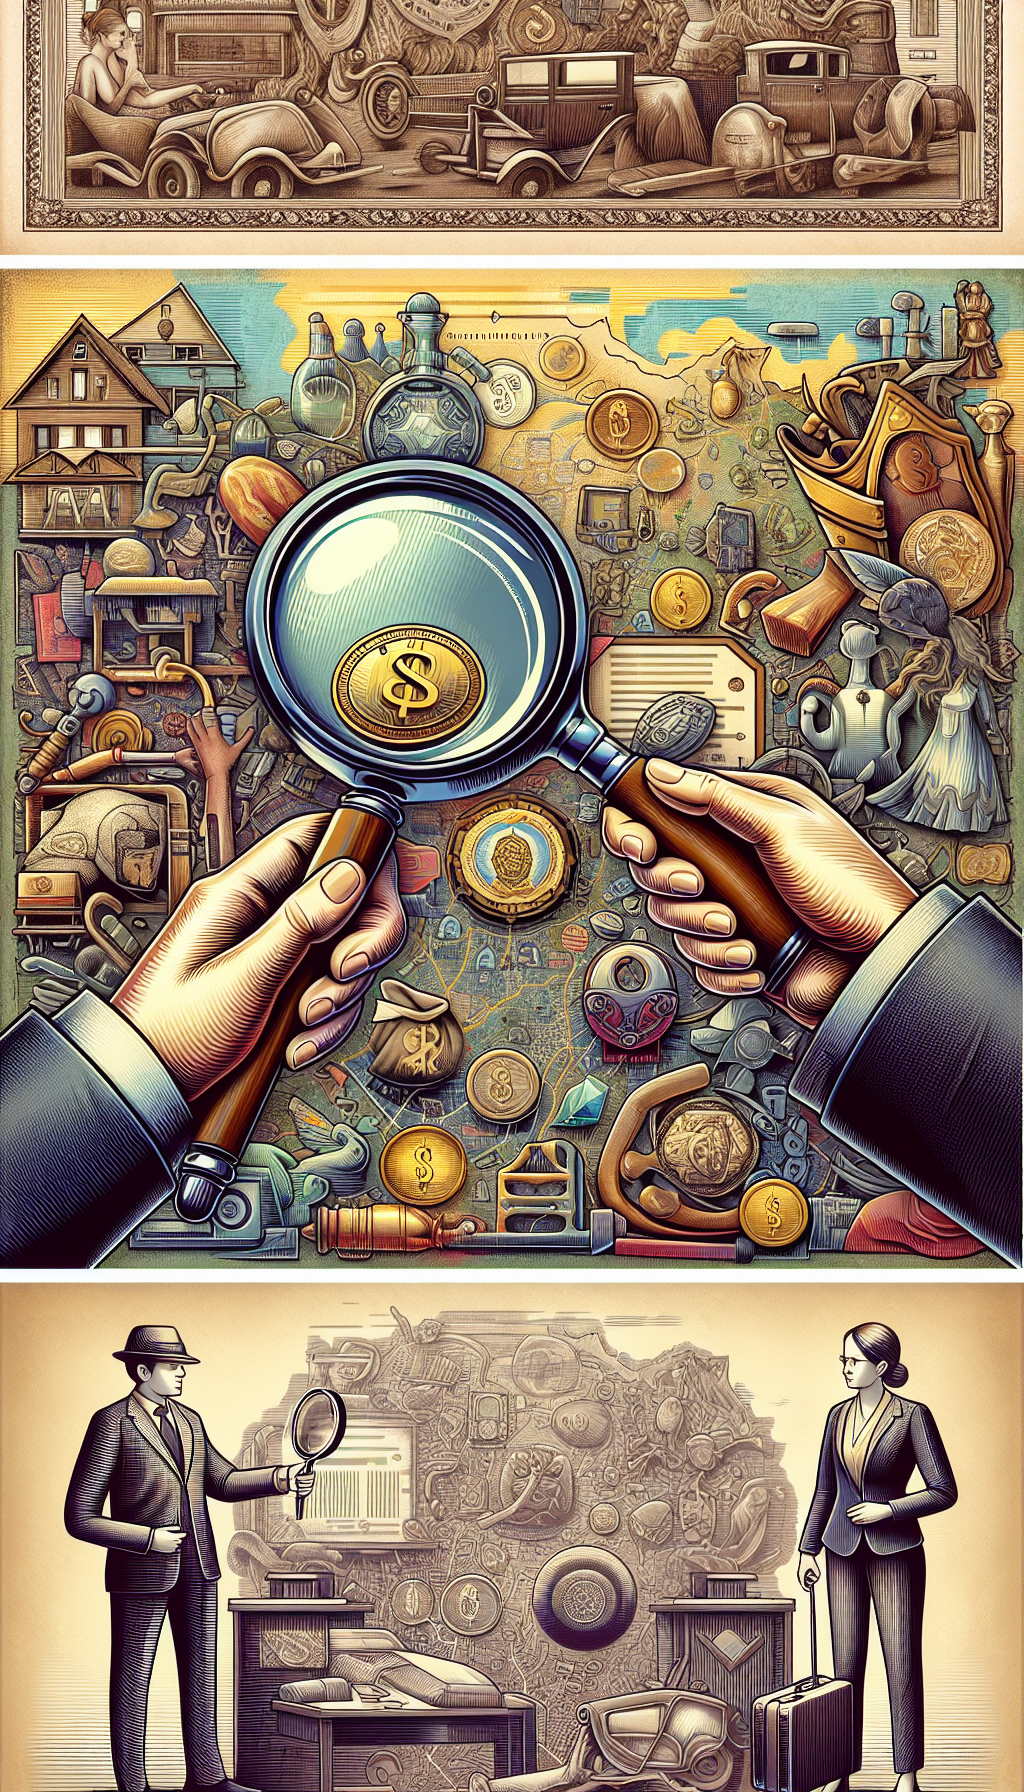 An illustration depicts a magnifying glass over a map sprinkled with various antique items, each tagged with a dollar sign, and a professional appraiser, with a badge of authenticity in one hand, extending a helping hand to the local community, signaling fair pricing and trust. The styles range from watercolor antiques to digital lines for the map and appraiser.